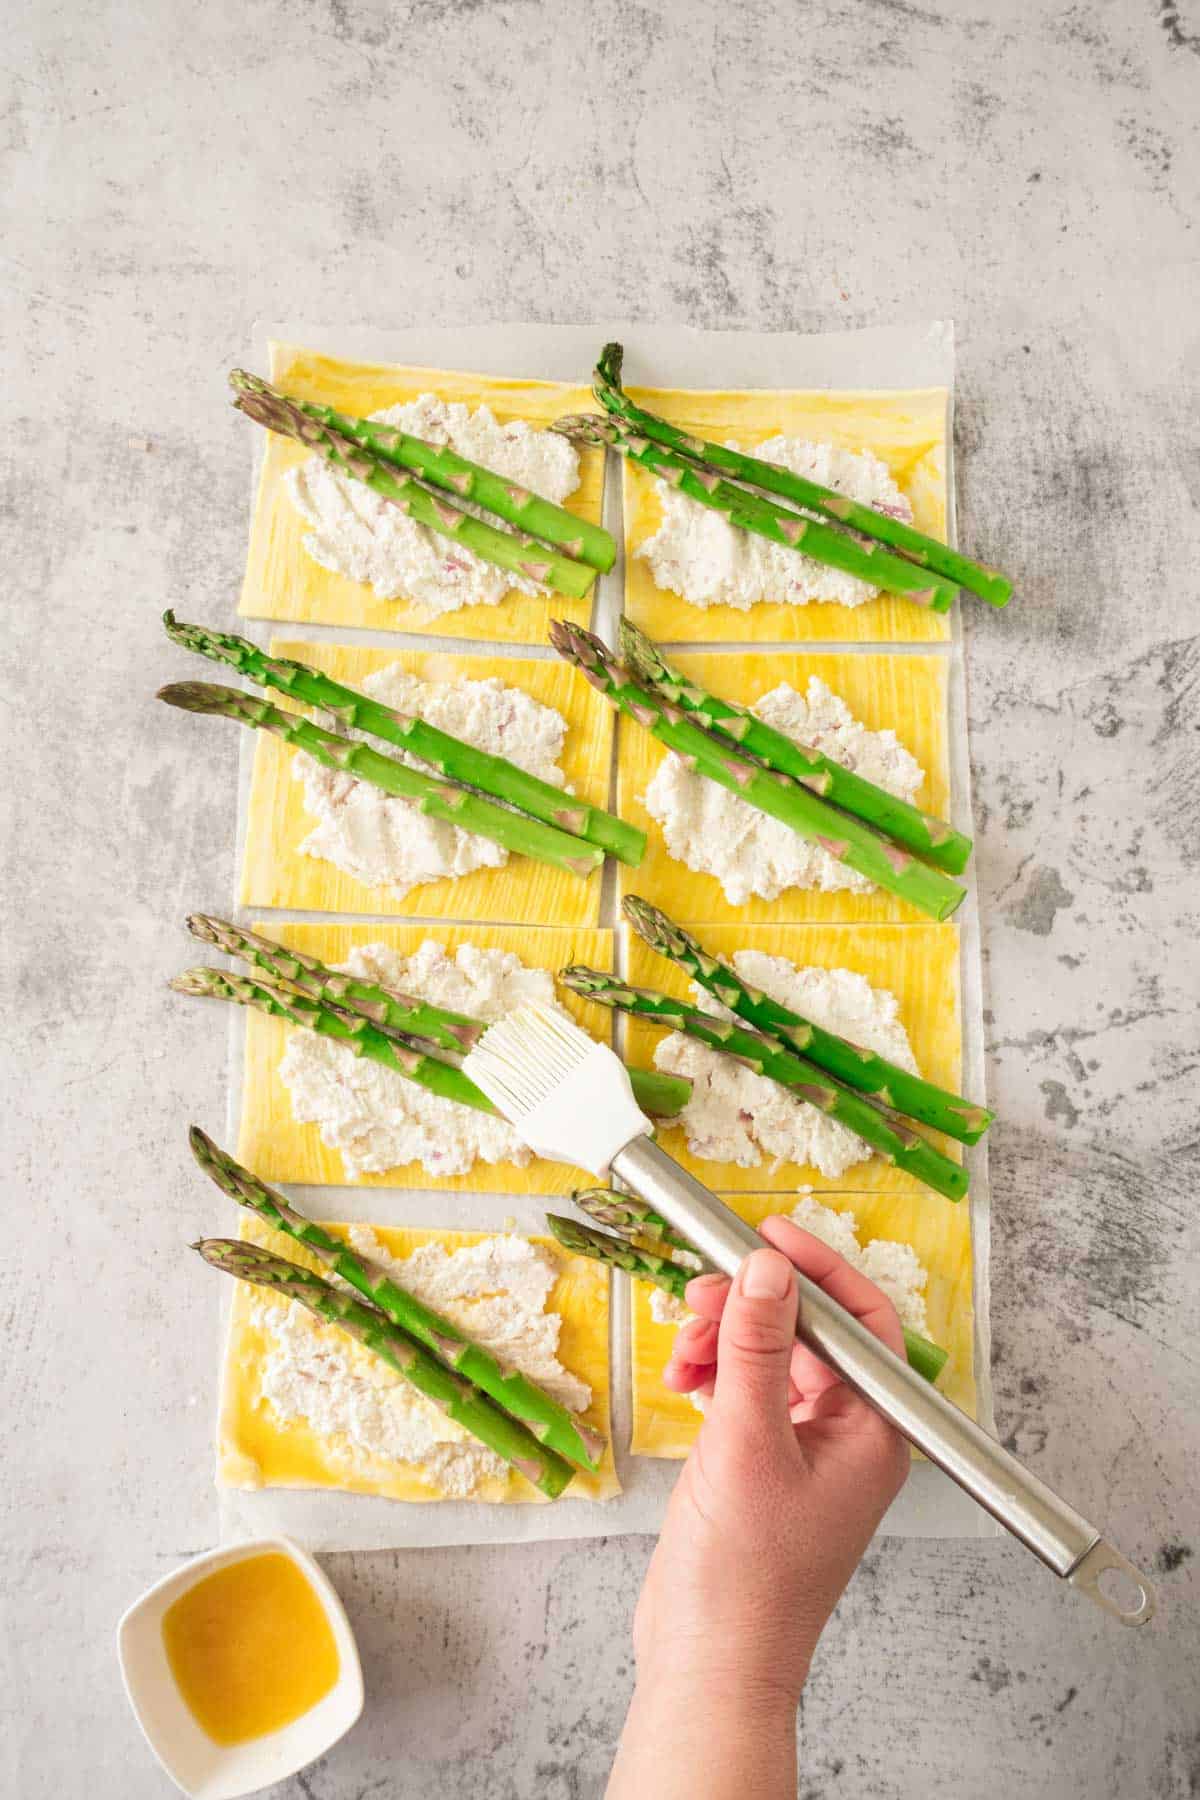 Preparing asparagus-topped puff pastry sheets with ricotta cheese, with a hand brushing on butter before baking.